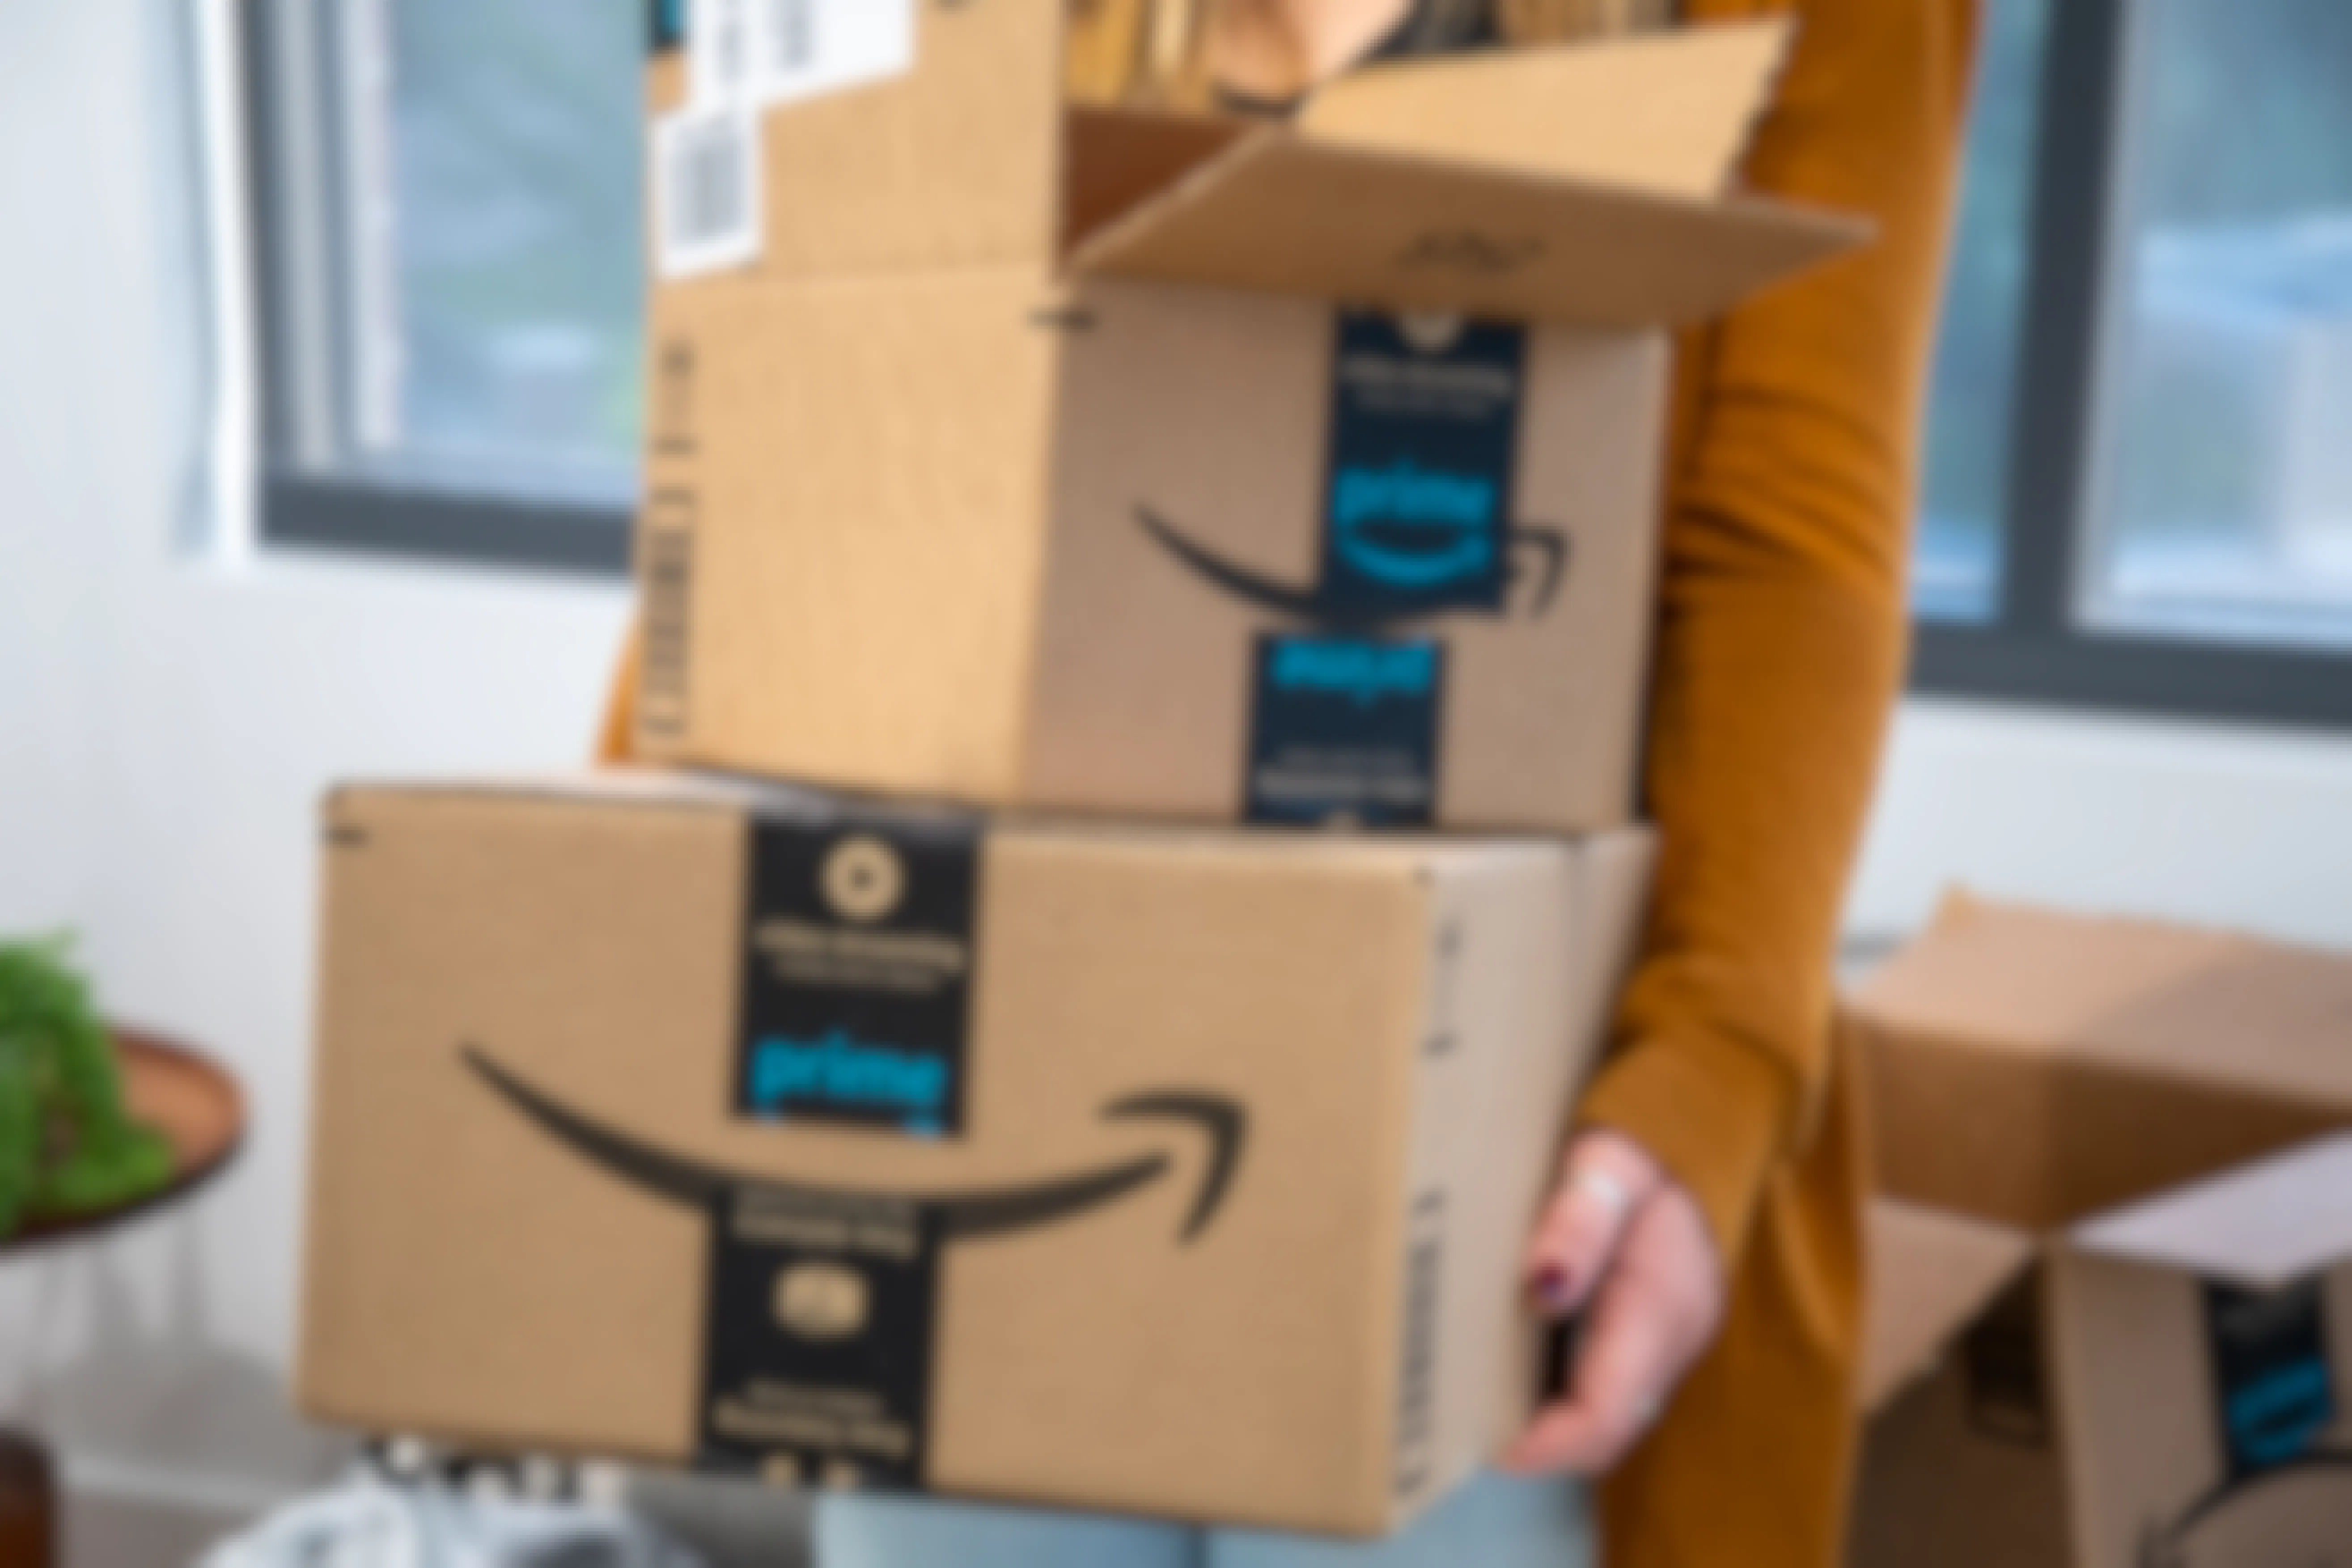 How Amazon's No-Rush Shipping Credits Works